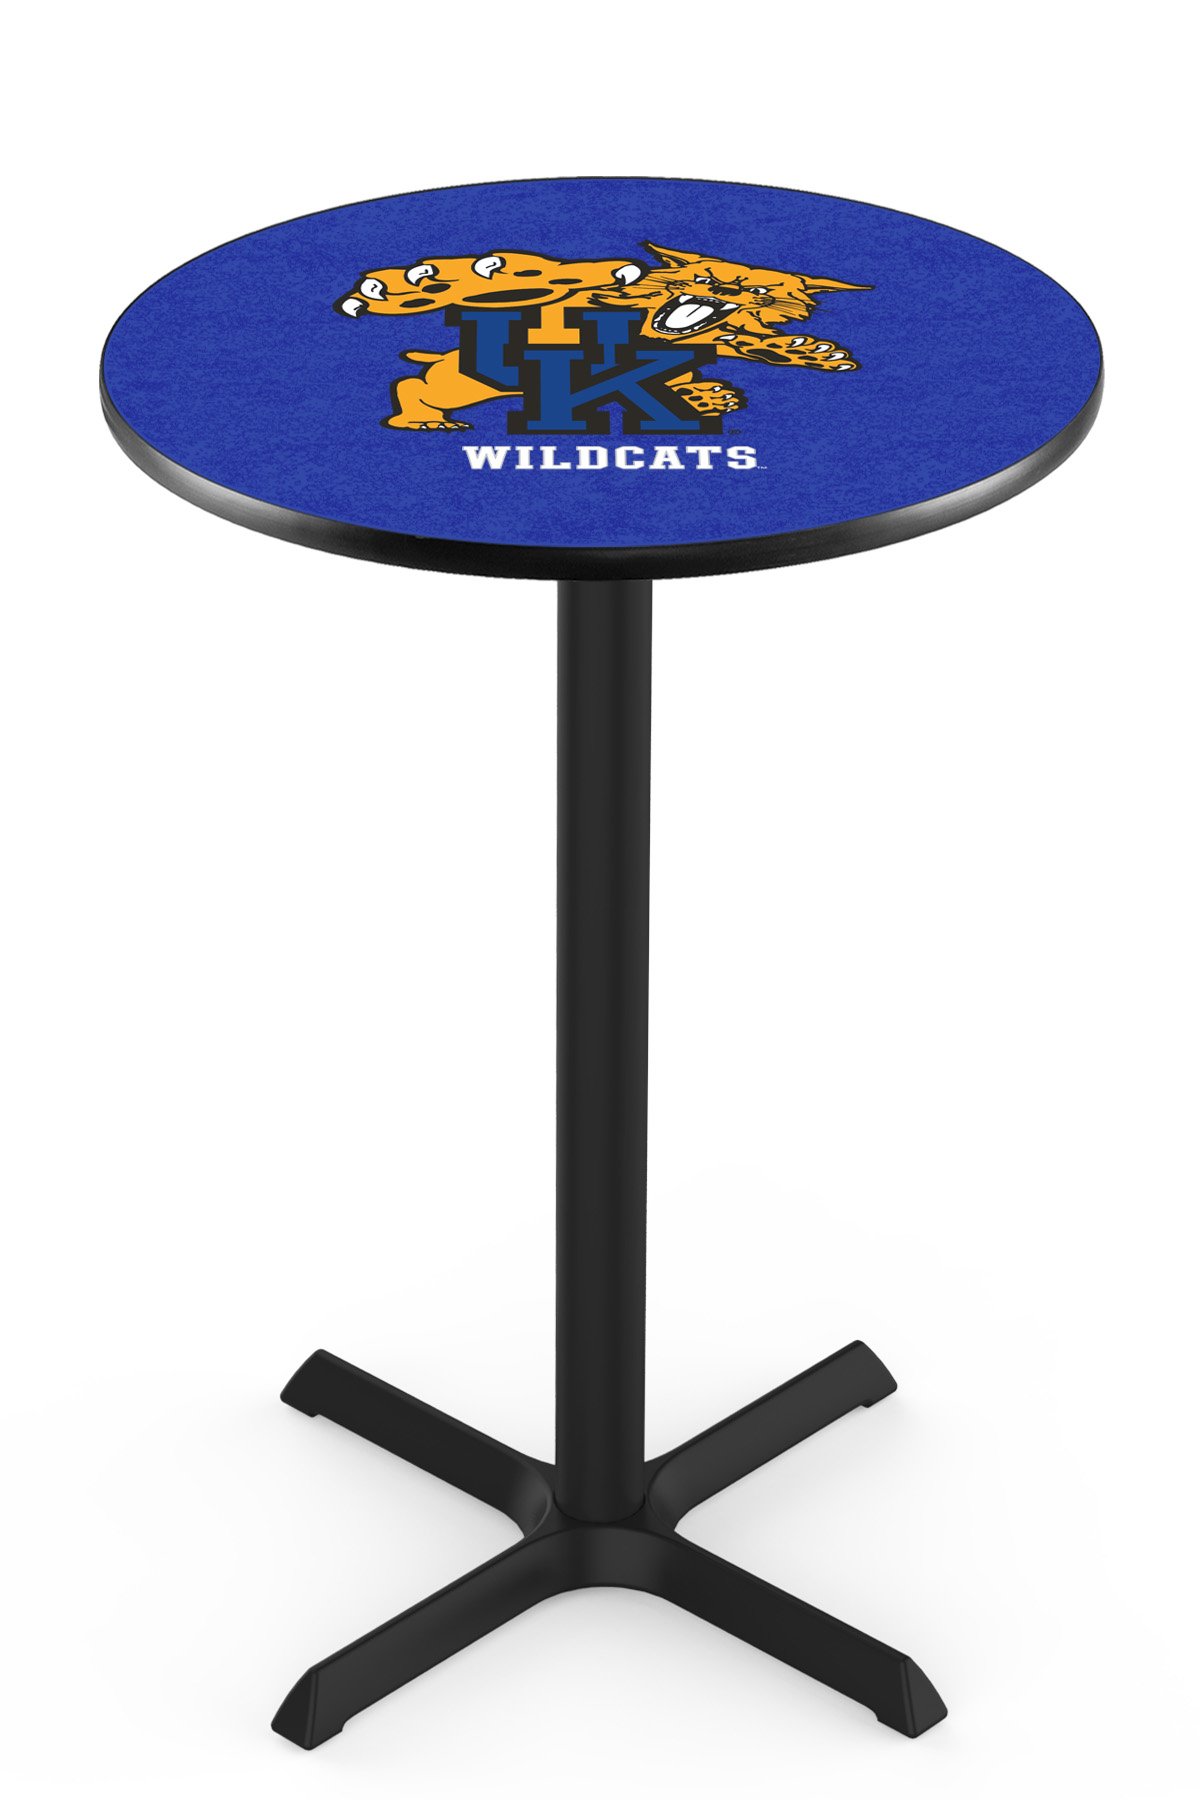 Holland Bar Stool L211 University of Kentucky (Cat) 36&quot; Tall - 36&quot; Top Pub Table with Black Wrinkle Finish